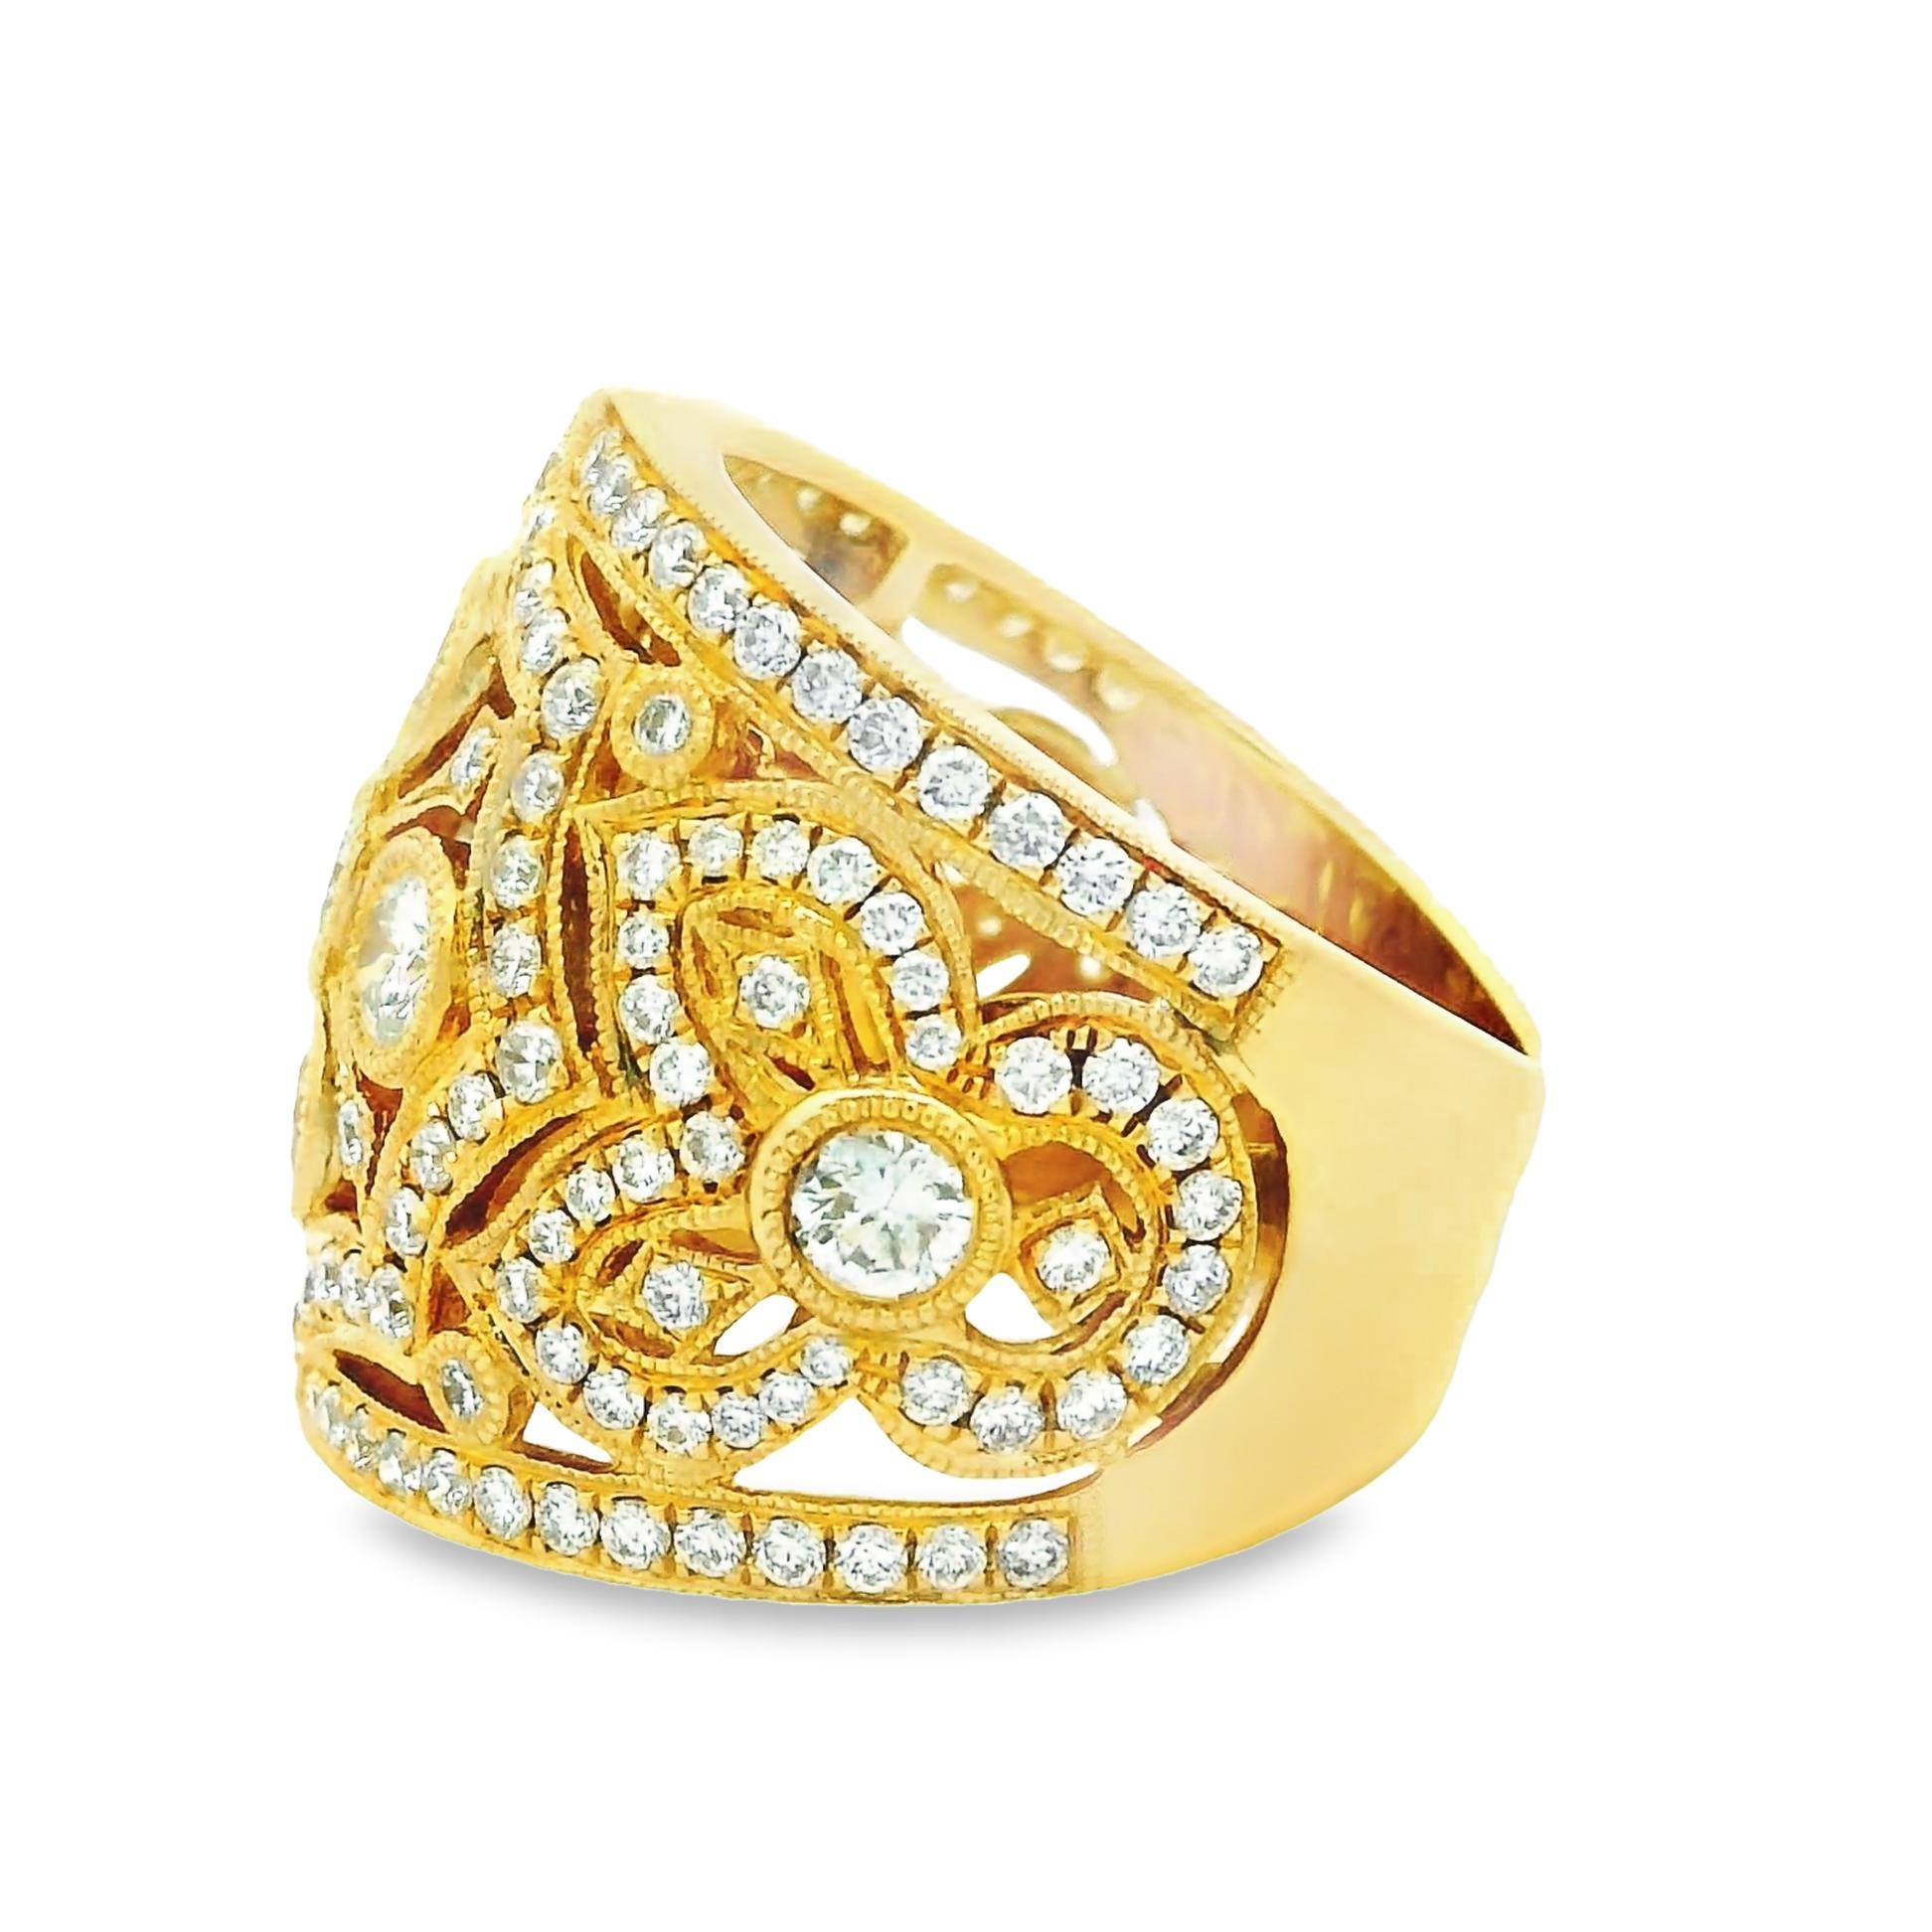 Round Cut 2.23 Carats Diamond Antique-Style 18K Yellow Gold Band Ring For Sale